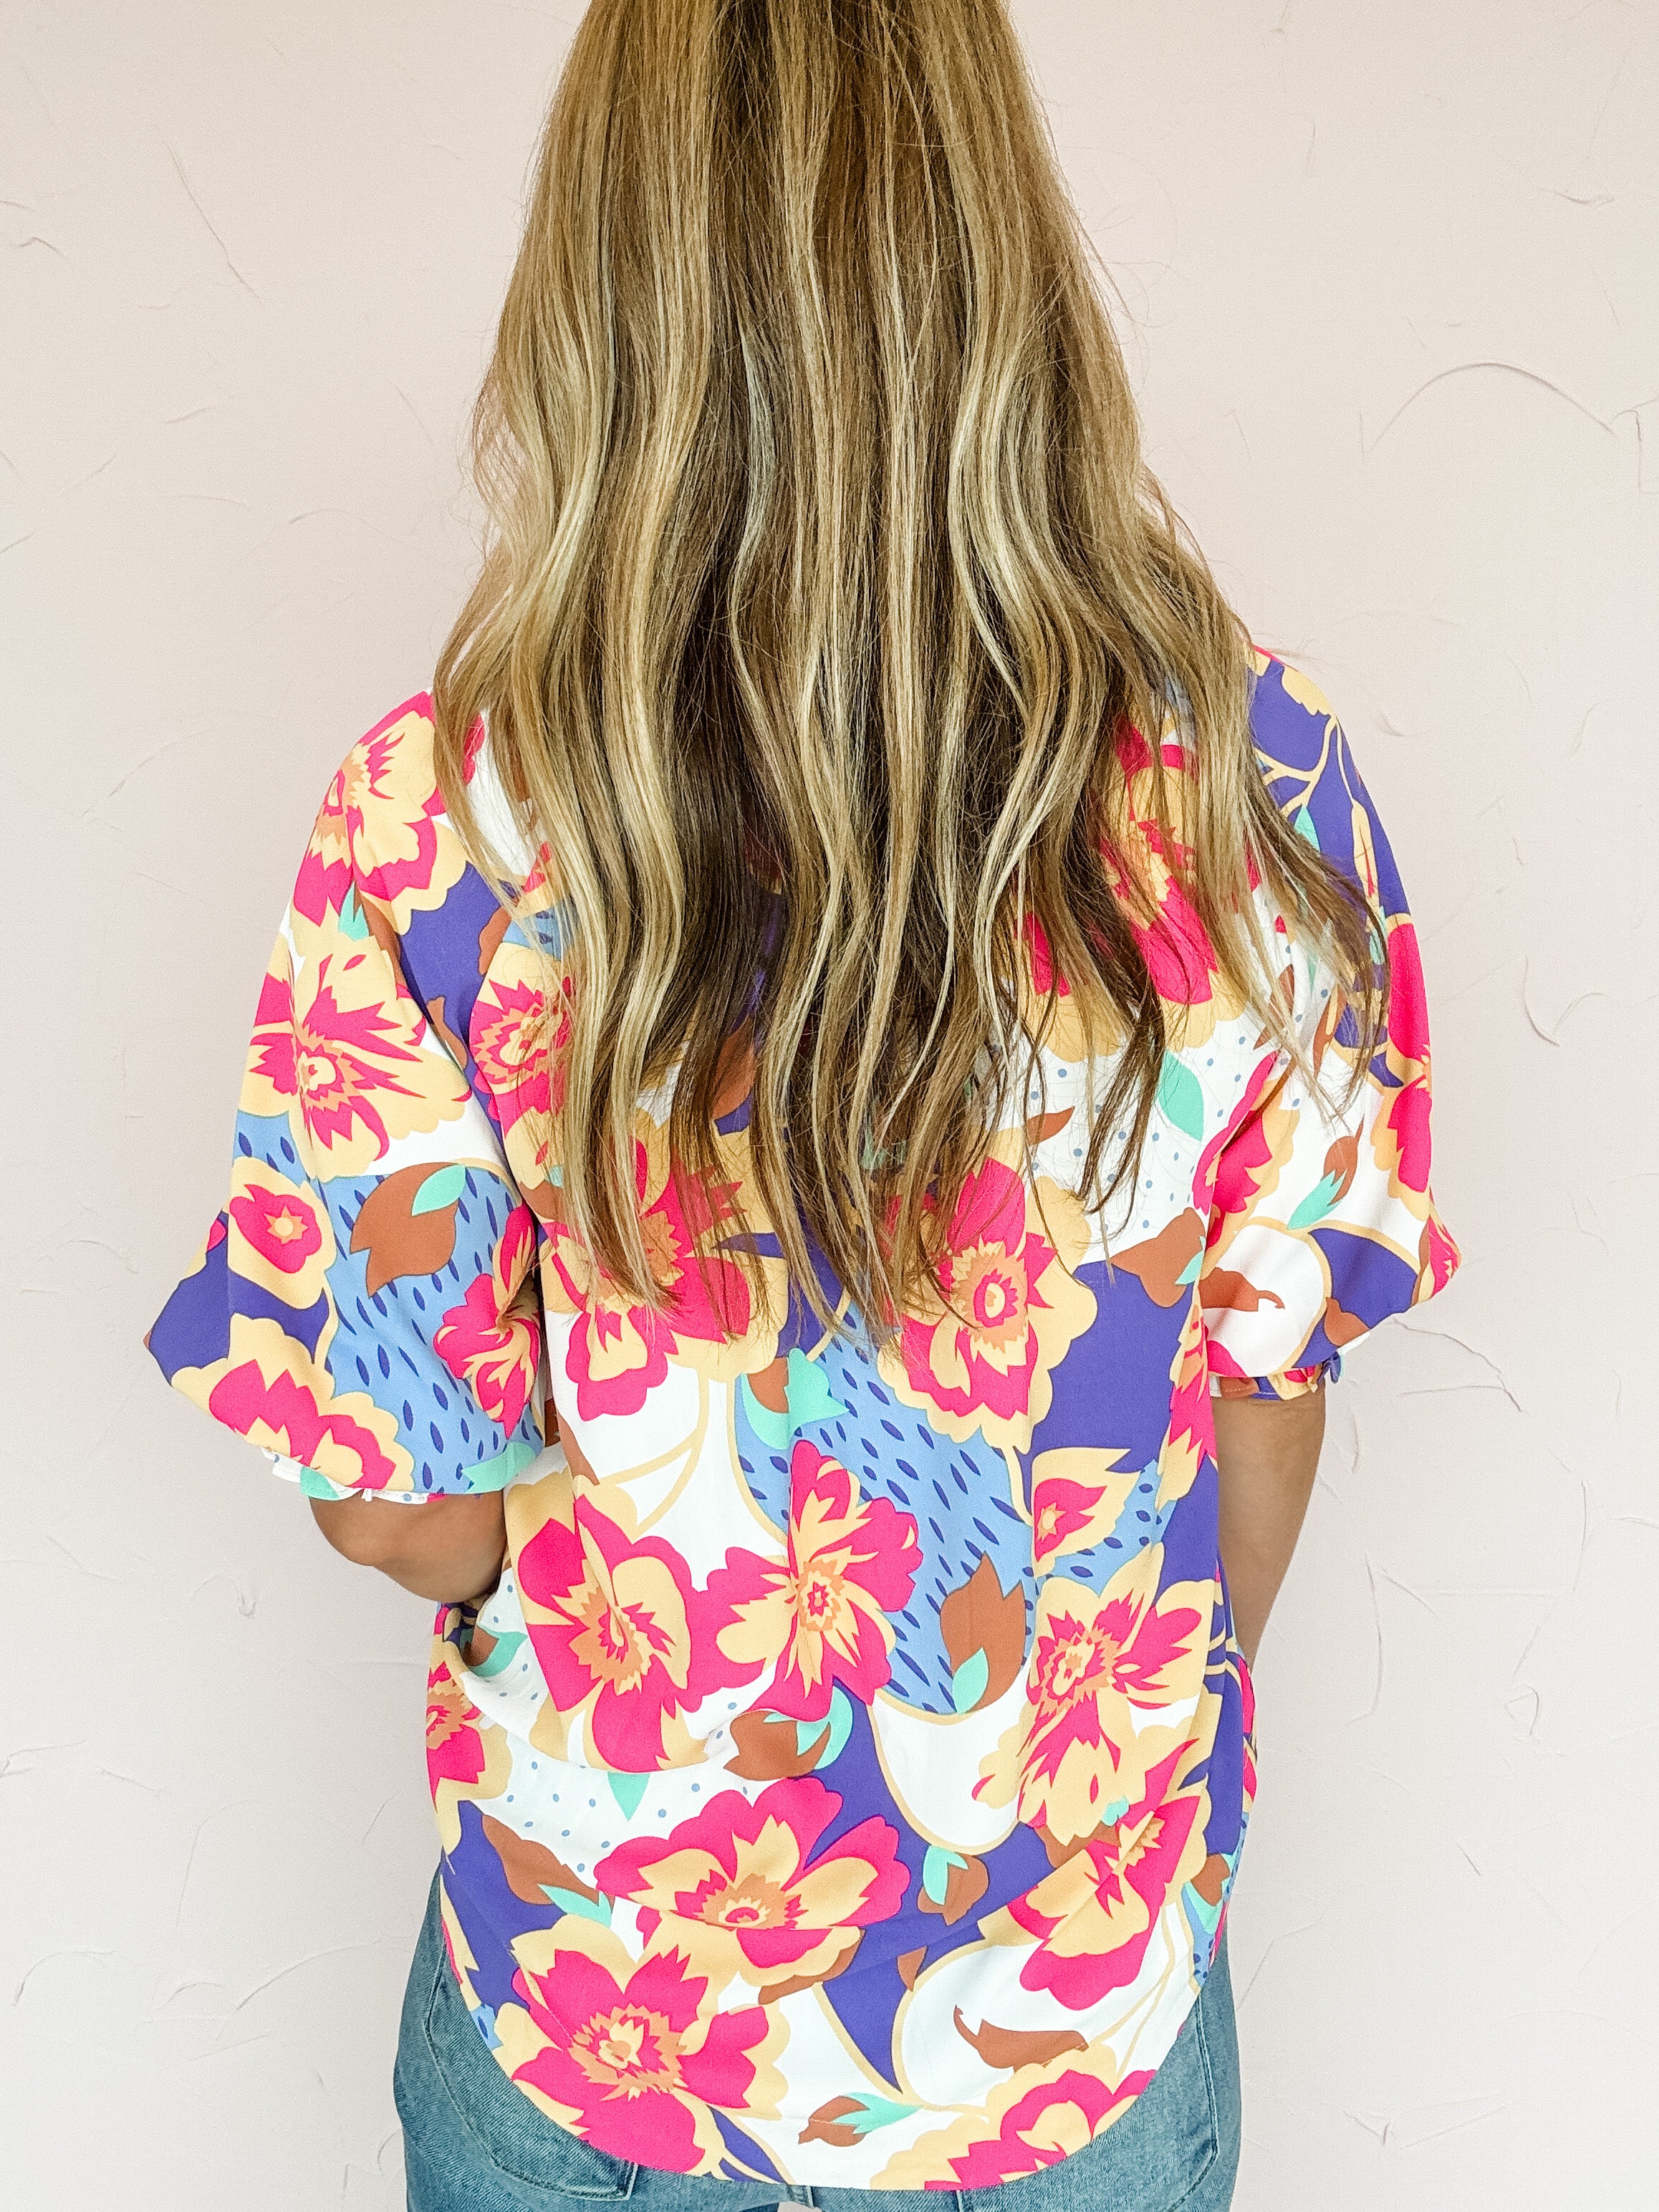 Floral Delight Top